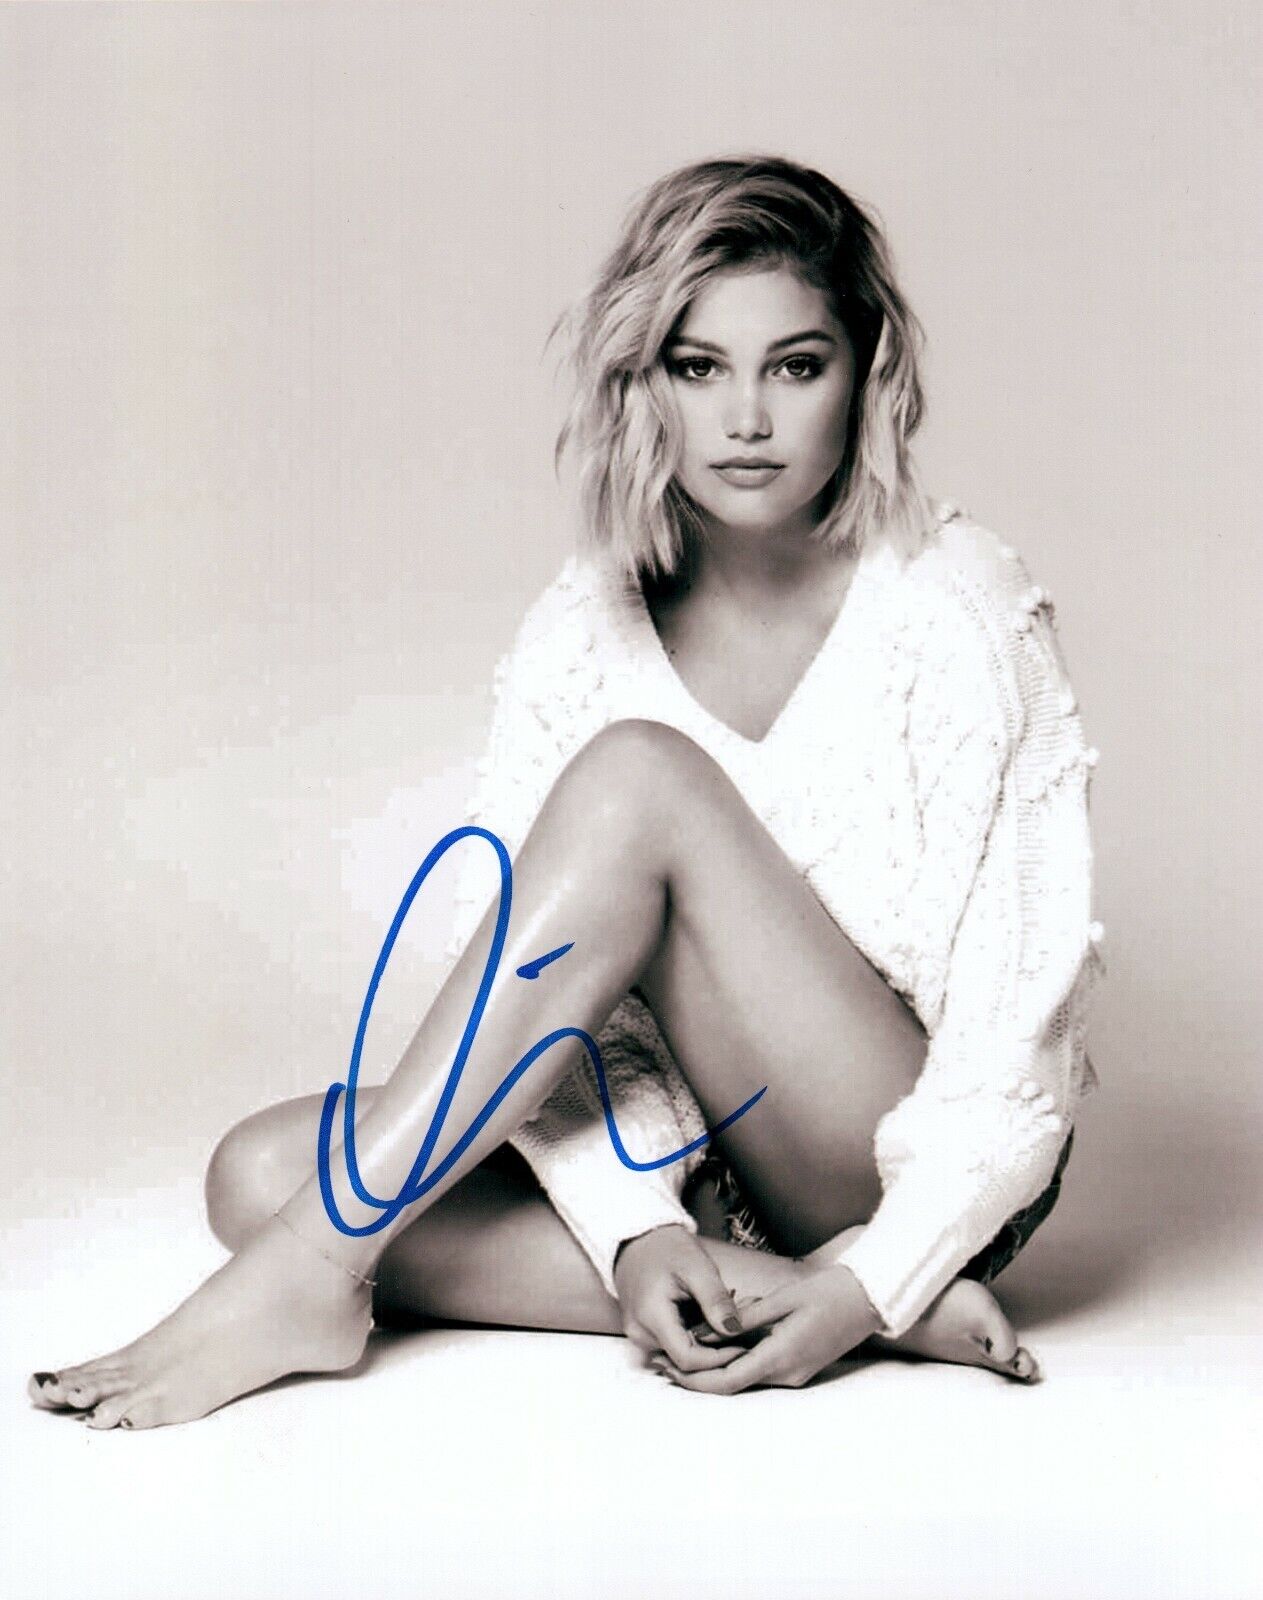 Olivia Holt Disney Actress Singer Signed 8x10 Autographed Photo Poster painting COA 2